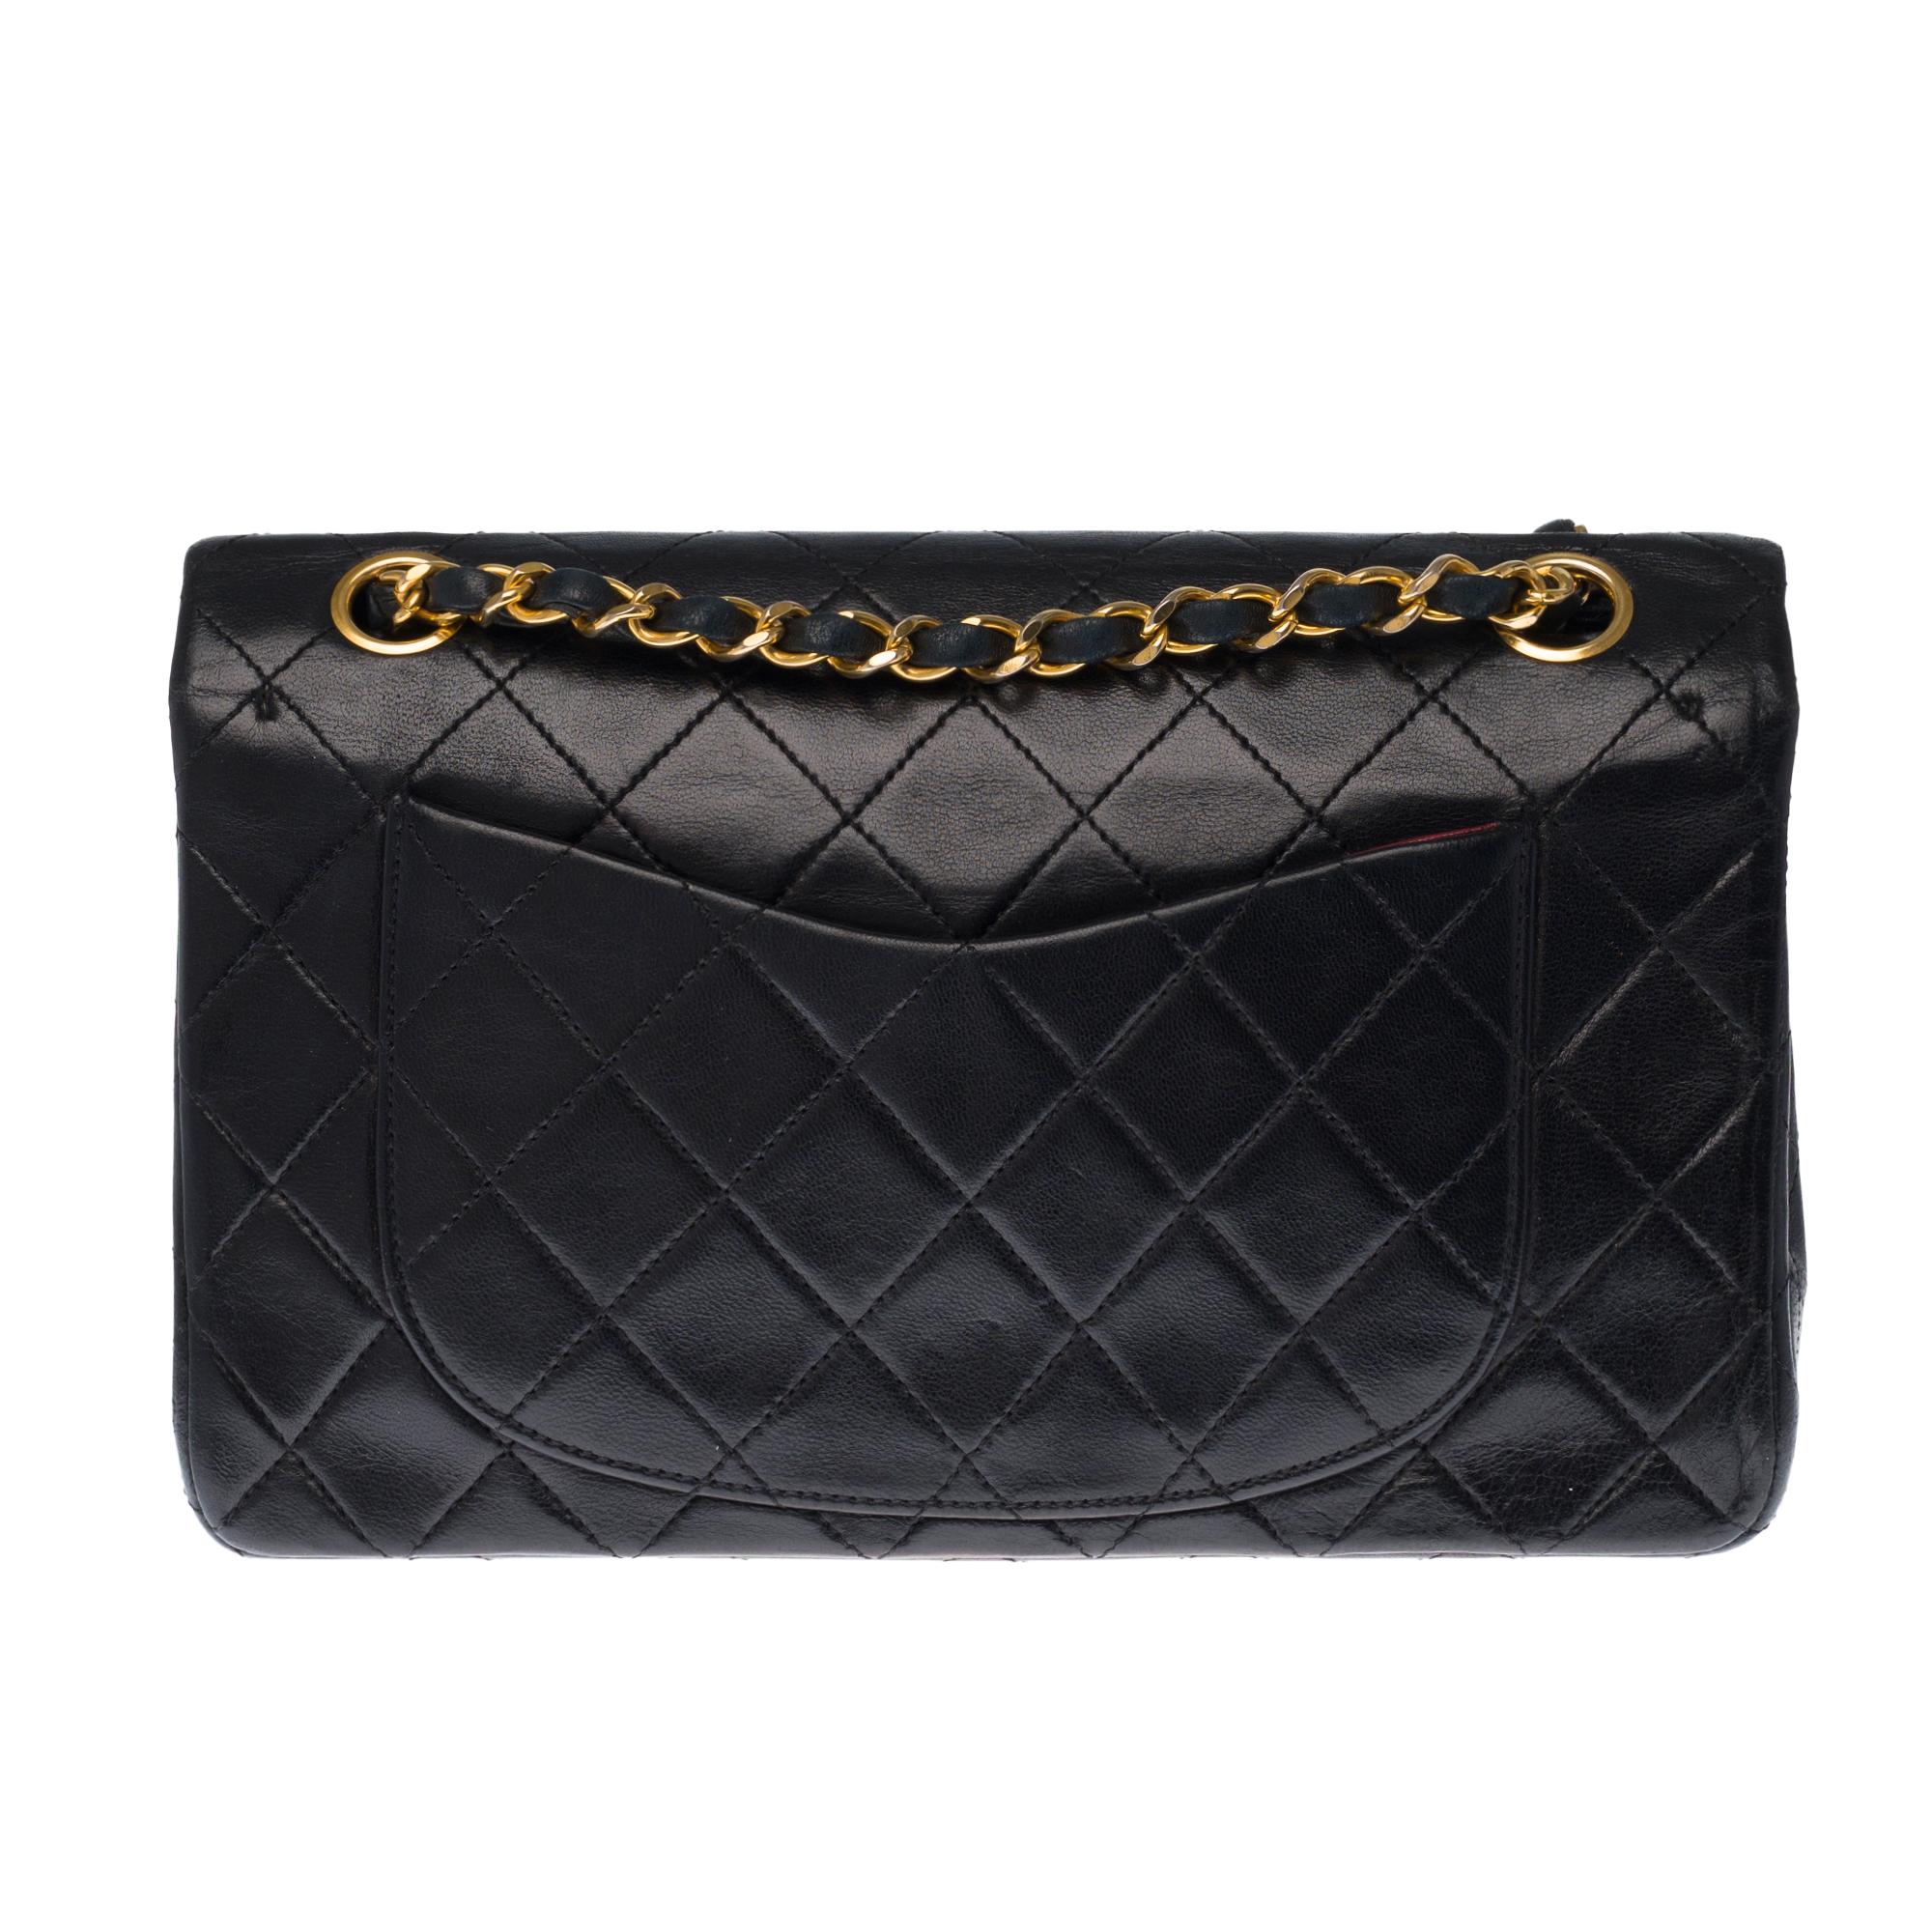 The coveted Chanel Timeless 23cm double flap bag in quilted black lambskin leather, gold metal hardware, gold metal chain interwoven with black leather.
Pocket on the back of the bag.
Flap closure, gold-tone CC symbol.
Double flap.
Zip on lower